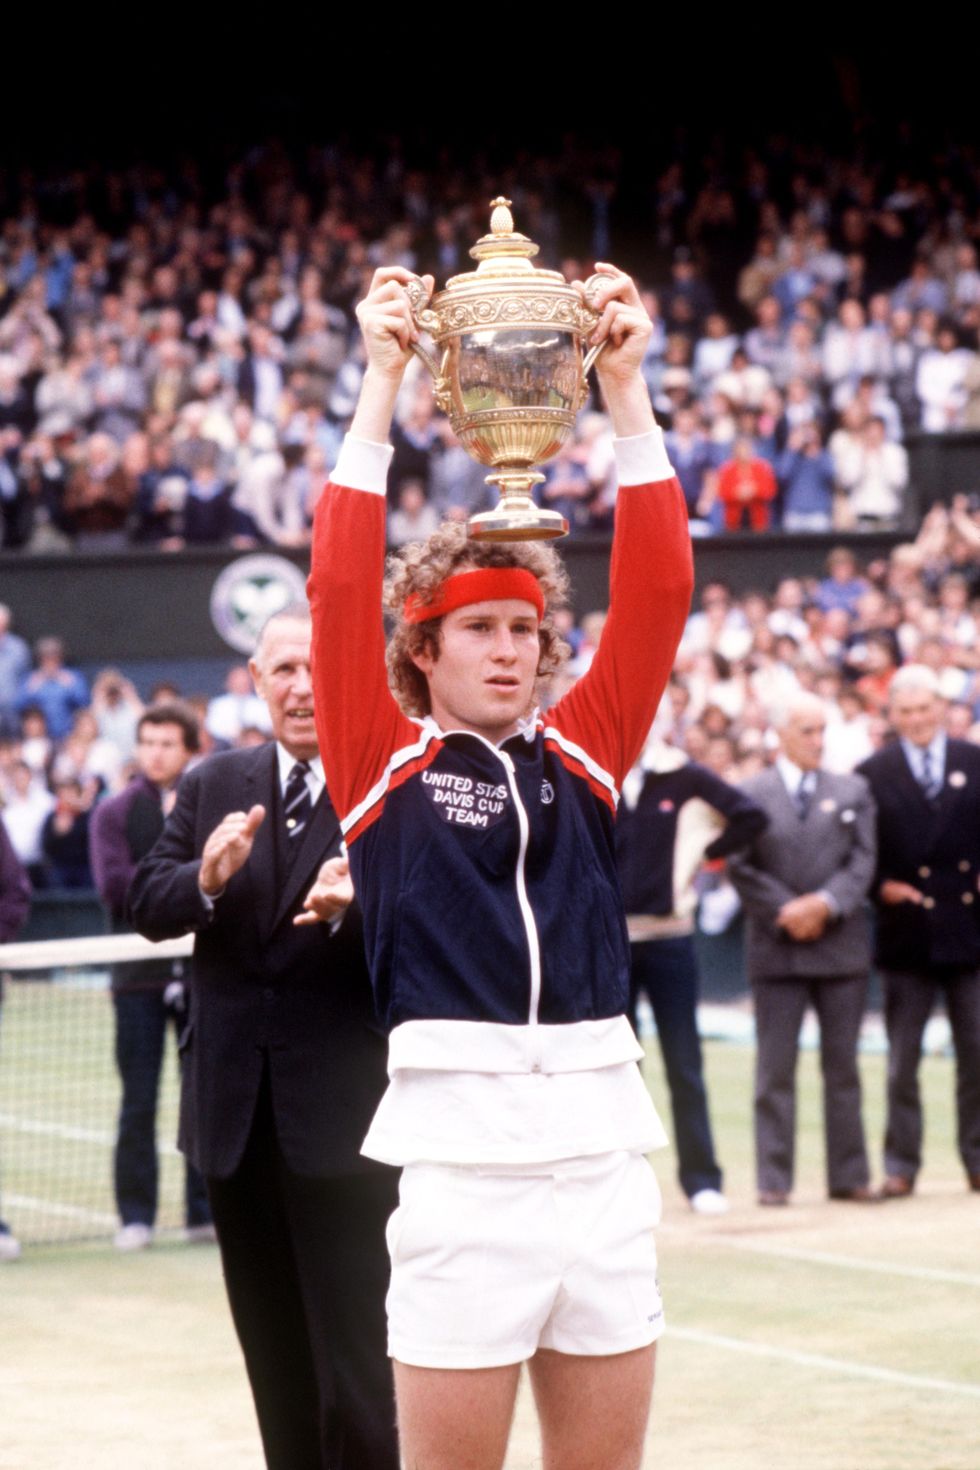 john mcenroe holds aloft the trophy following his victory  photo by sgpa images via getty images